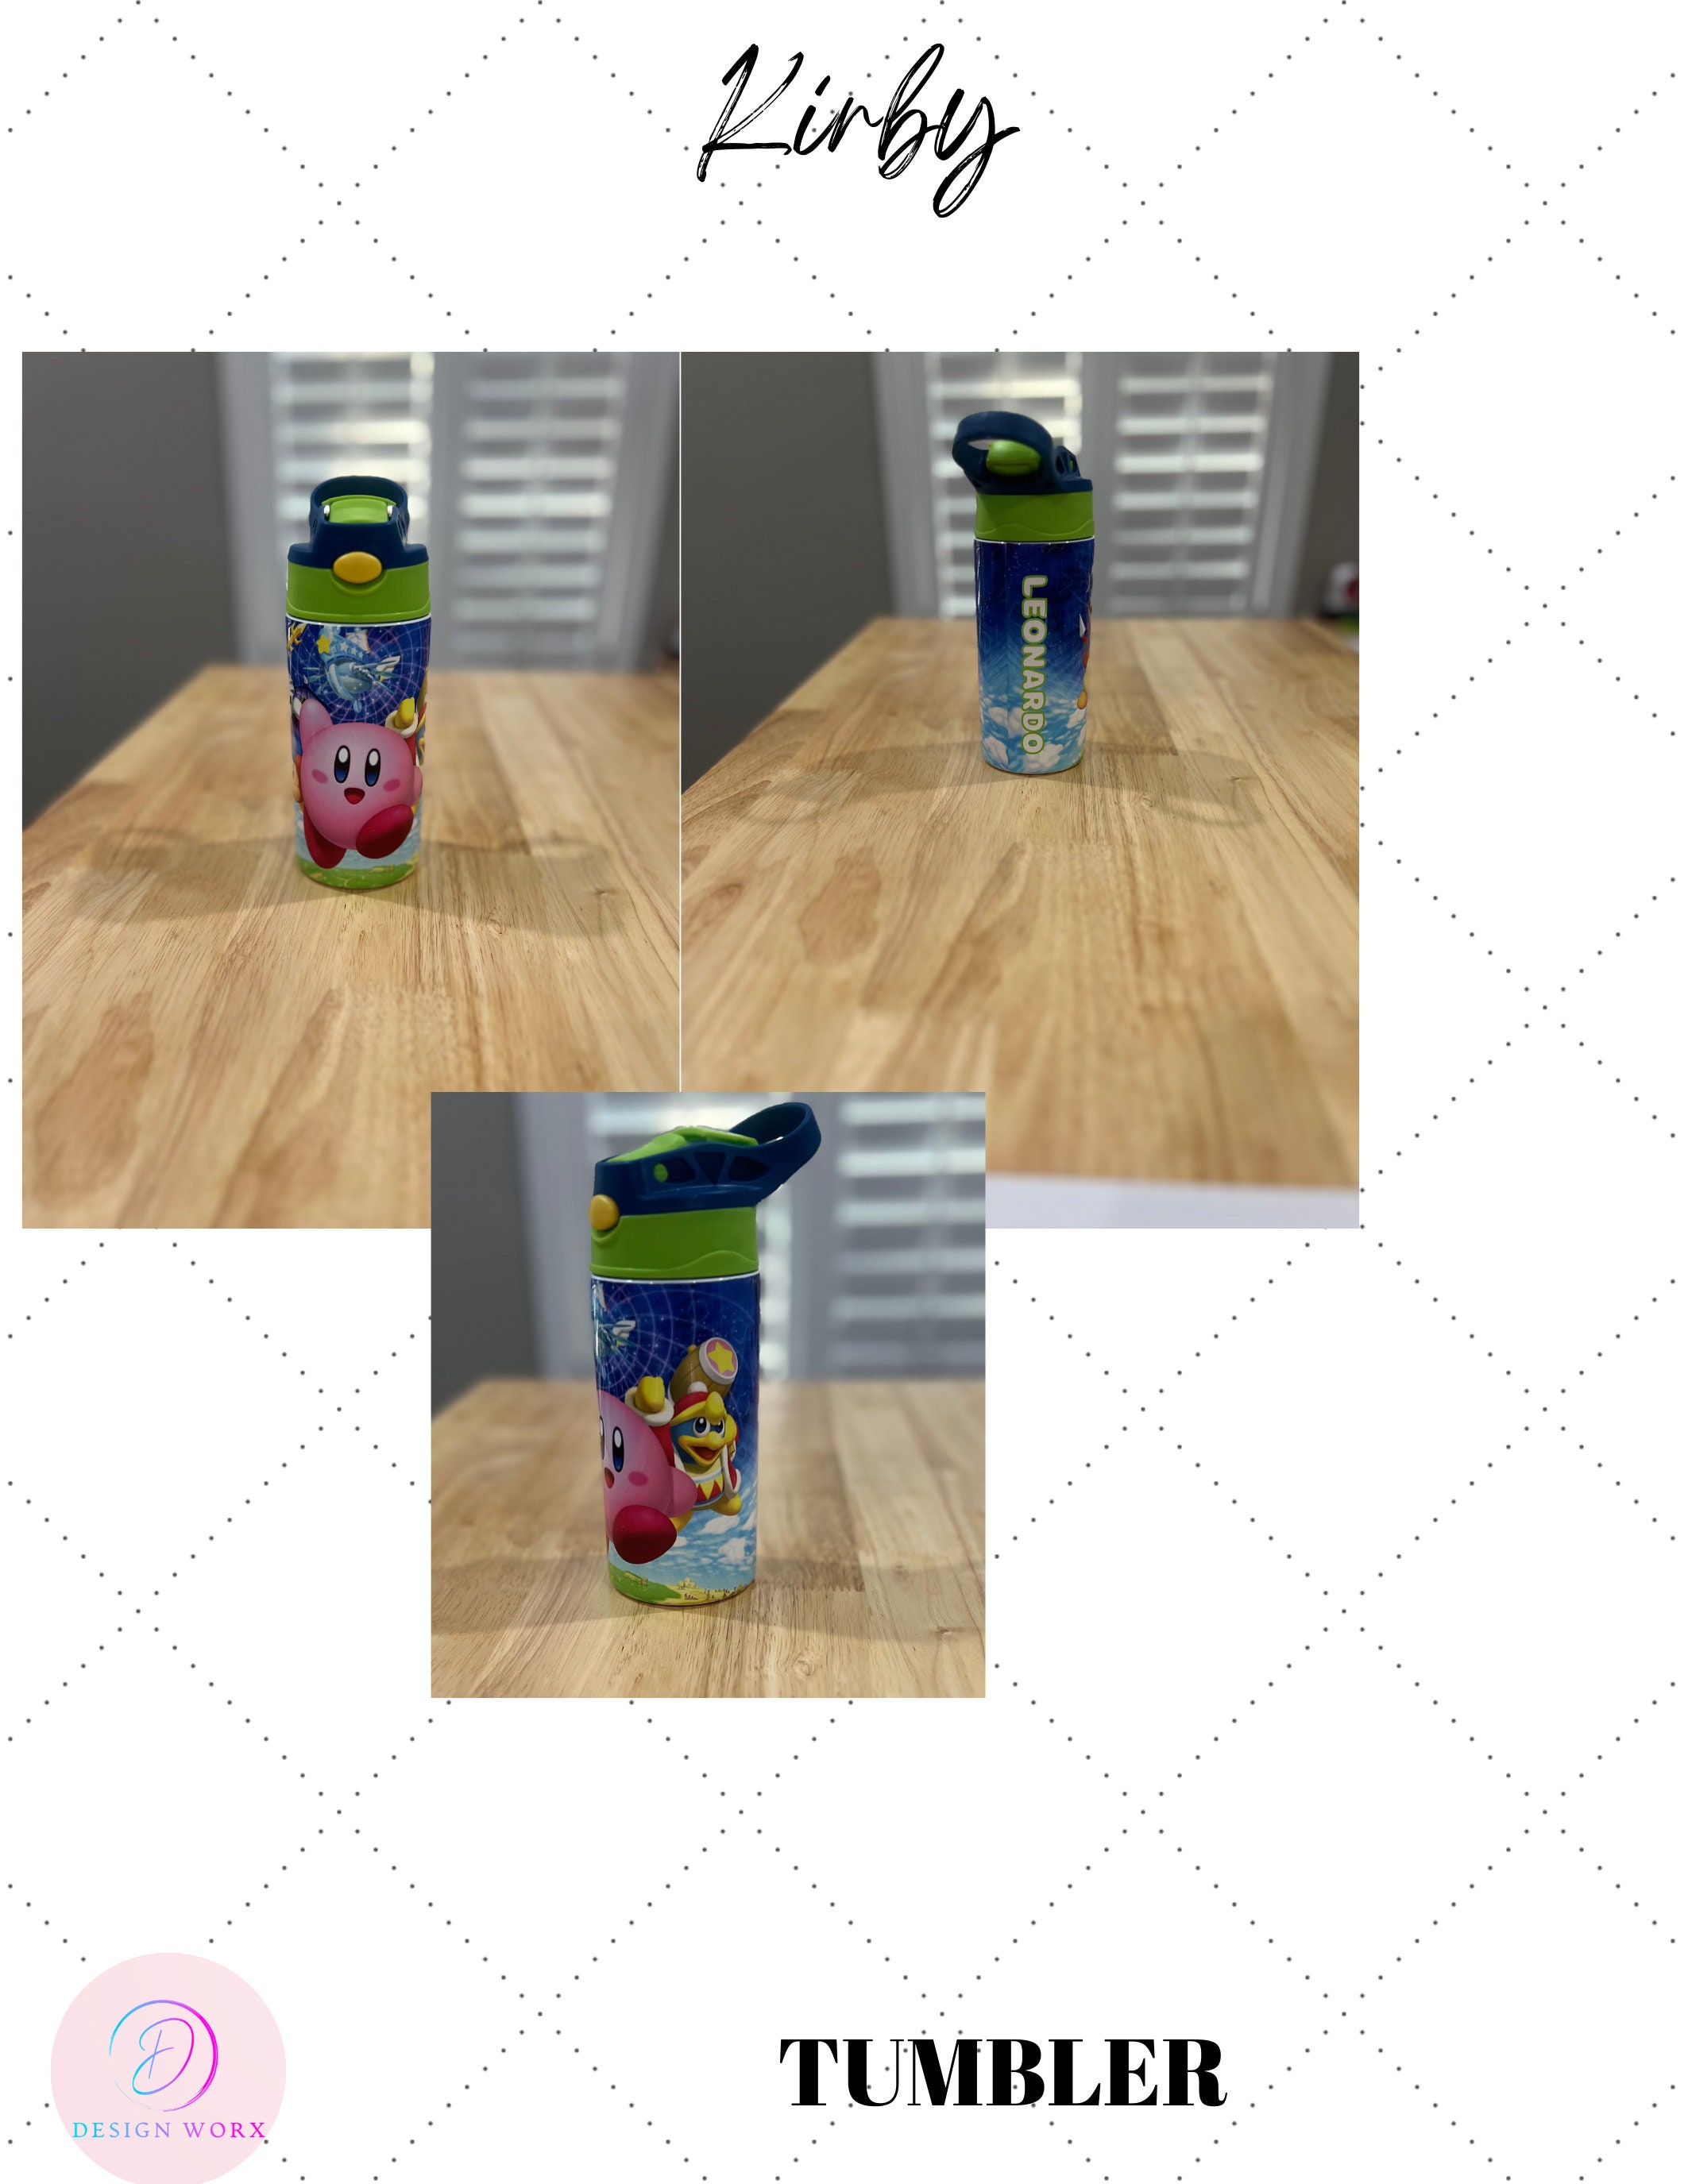 Kirby the Insulated Stainless Steel Water Bottle